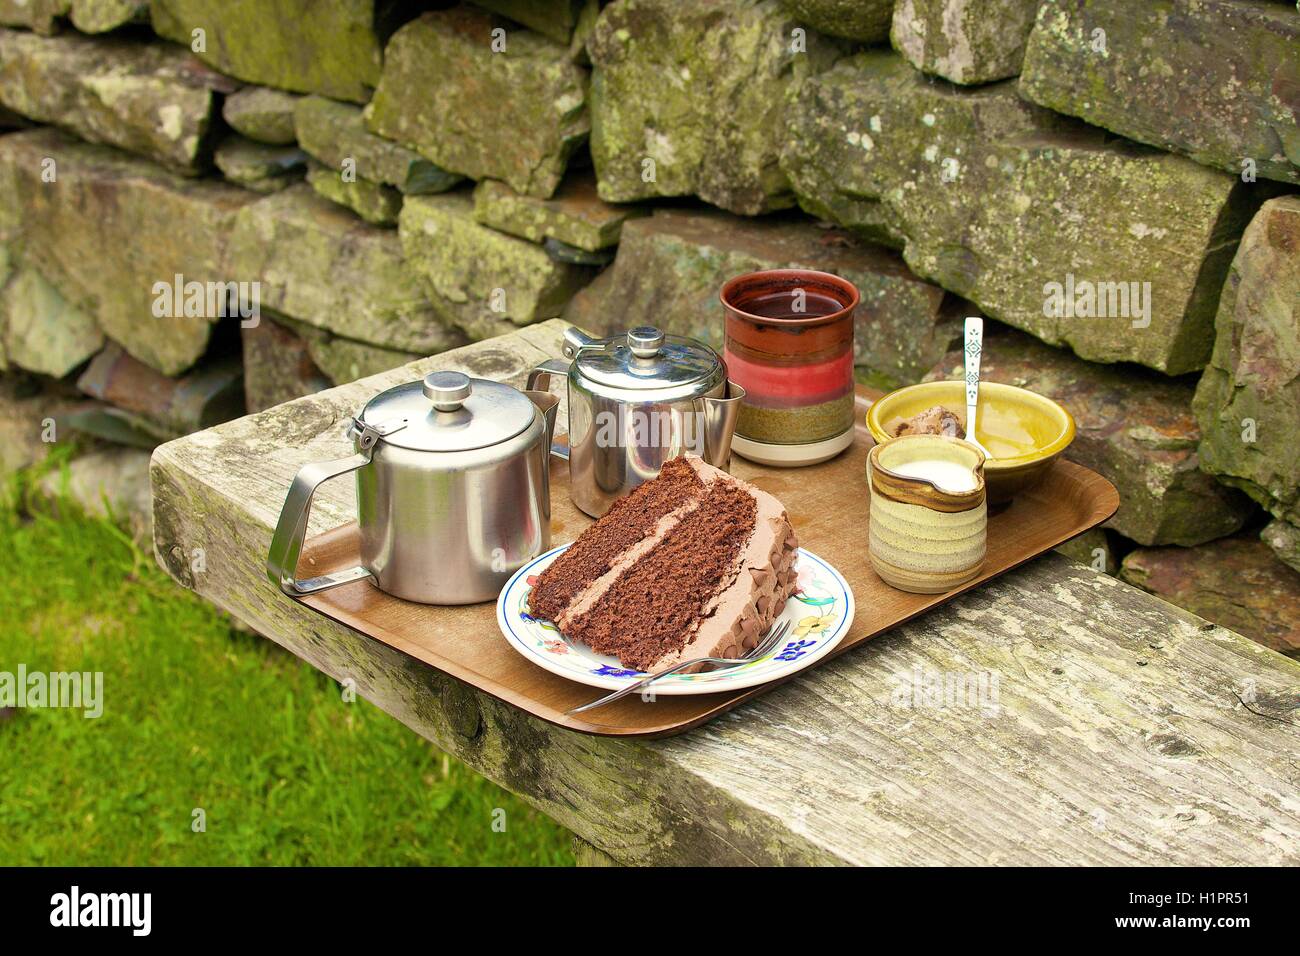 Tea and chocolate cake on a tray on a bench outside. Mosedale Coffee Shop, Quaker Meeting House, Mosedale, Cumbria, England, UK. Stock Photo